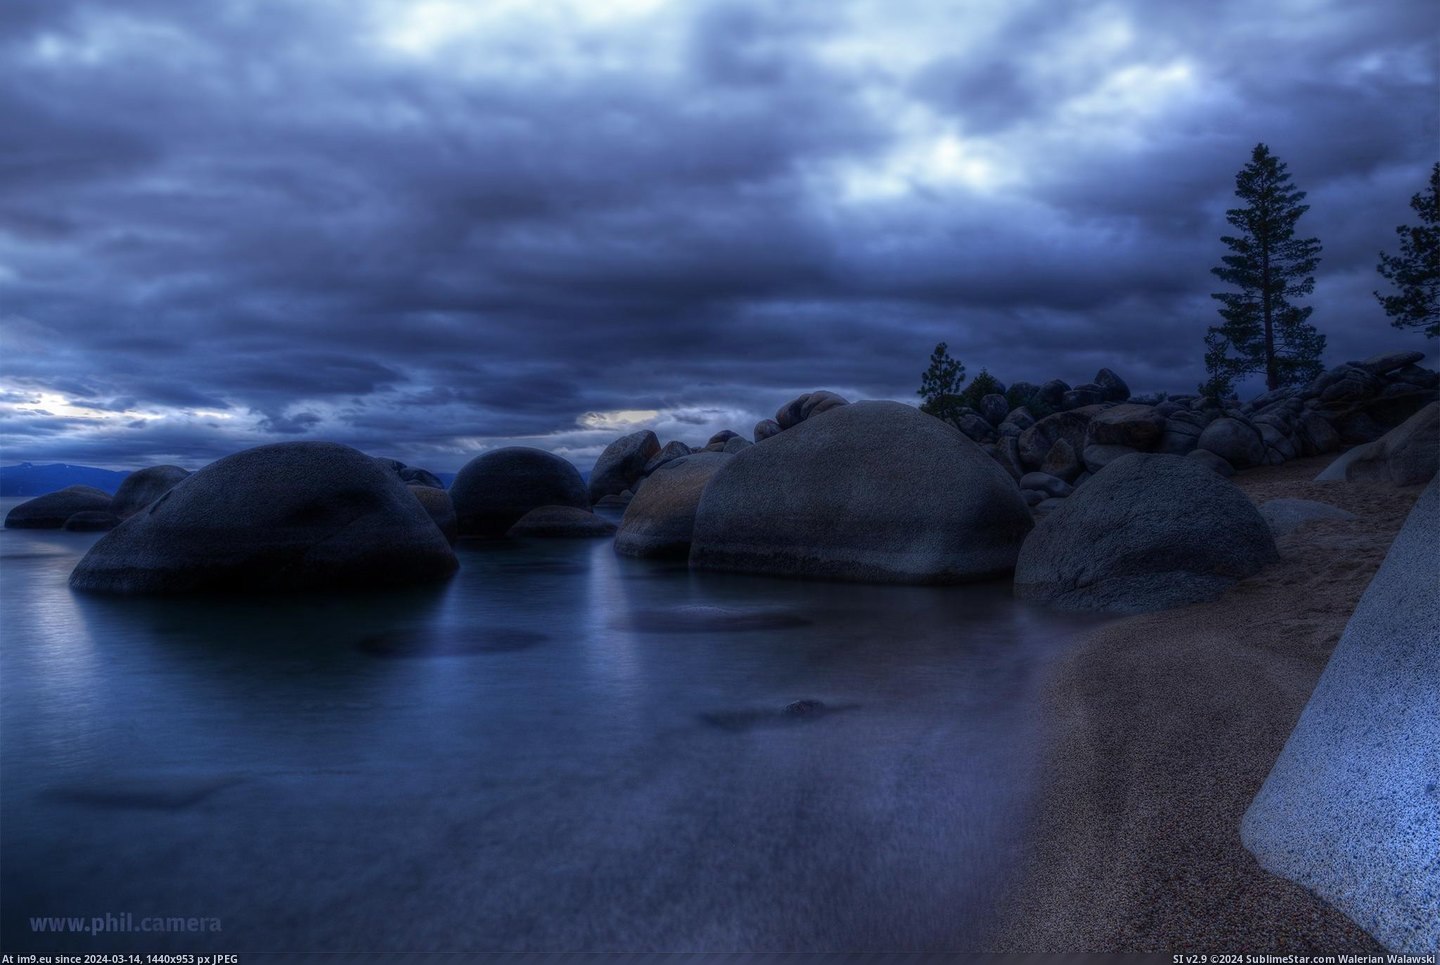 #Lake #Water #East #2048x1367 #Skies #Tahoe #Surreal #Shore [Earthporn] Stilled Water and Surreal Skies over east shore, Lake Tahoe, last weeked [oc][2048x1367] Pic. (Image of album My r/EARTHPORN favs))